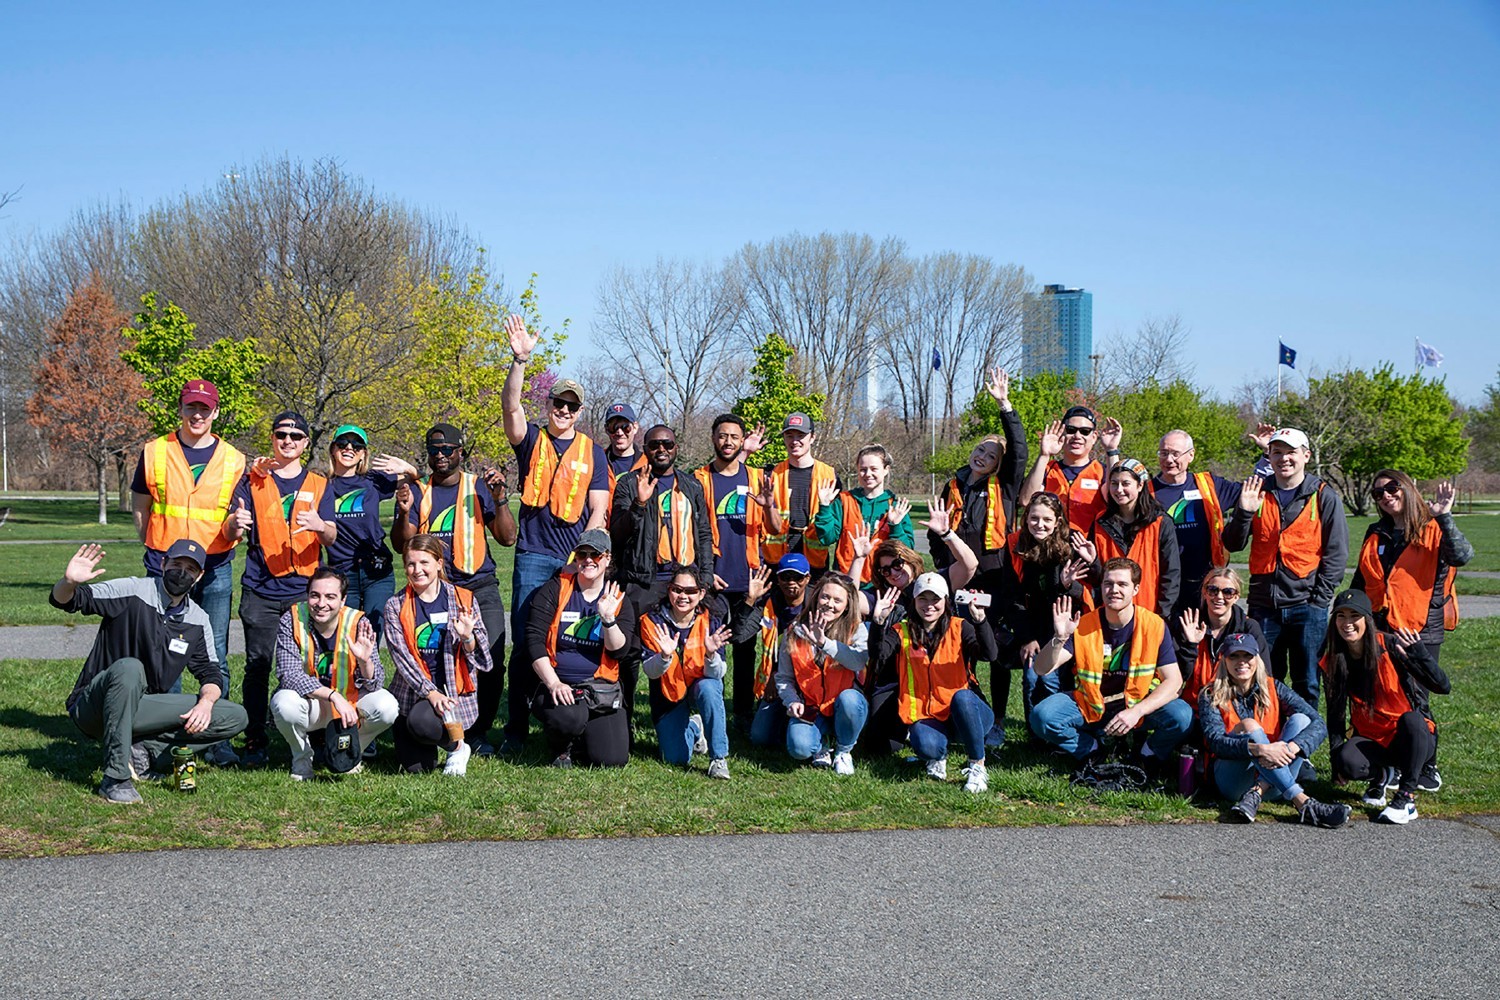 In celebration of Earth Day, we fertilized trees and prepared seedlings with Jersey Cares at Liberty State Park.